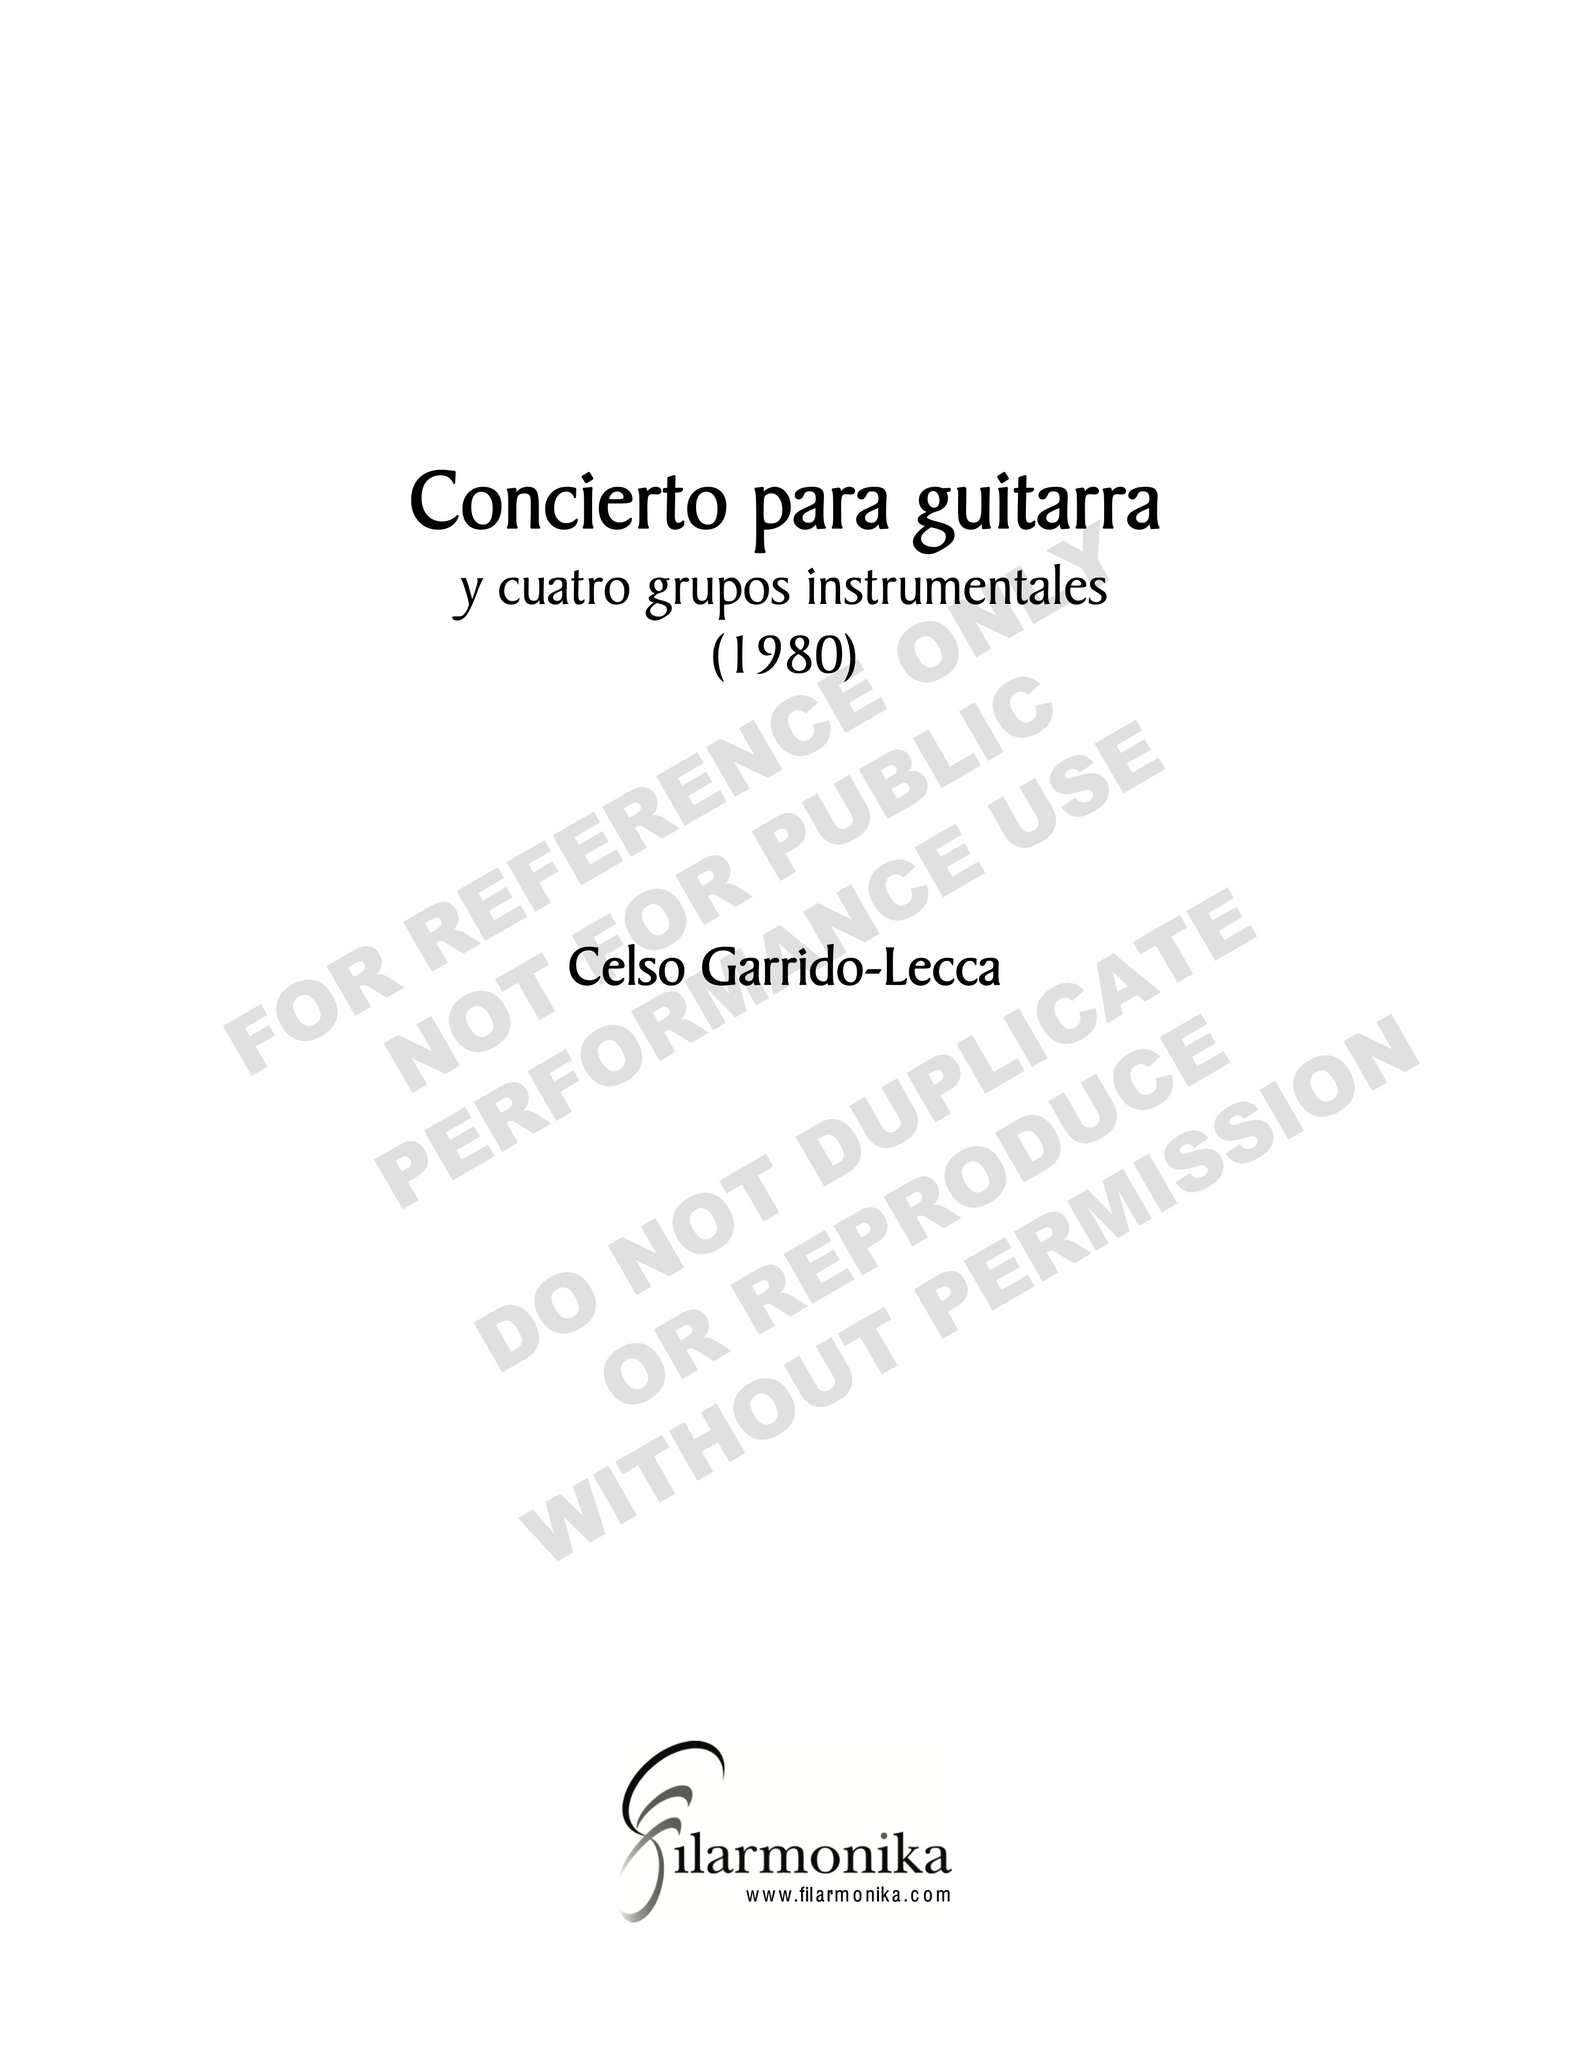 Concerto for guitar and four instrumental groups